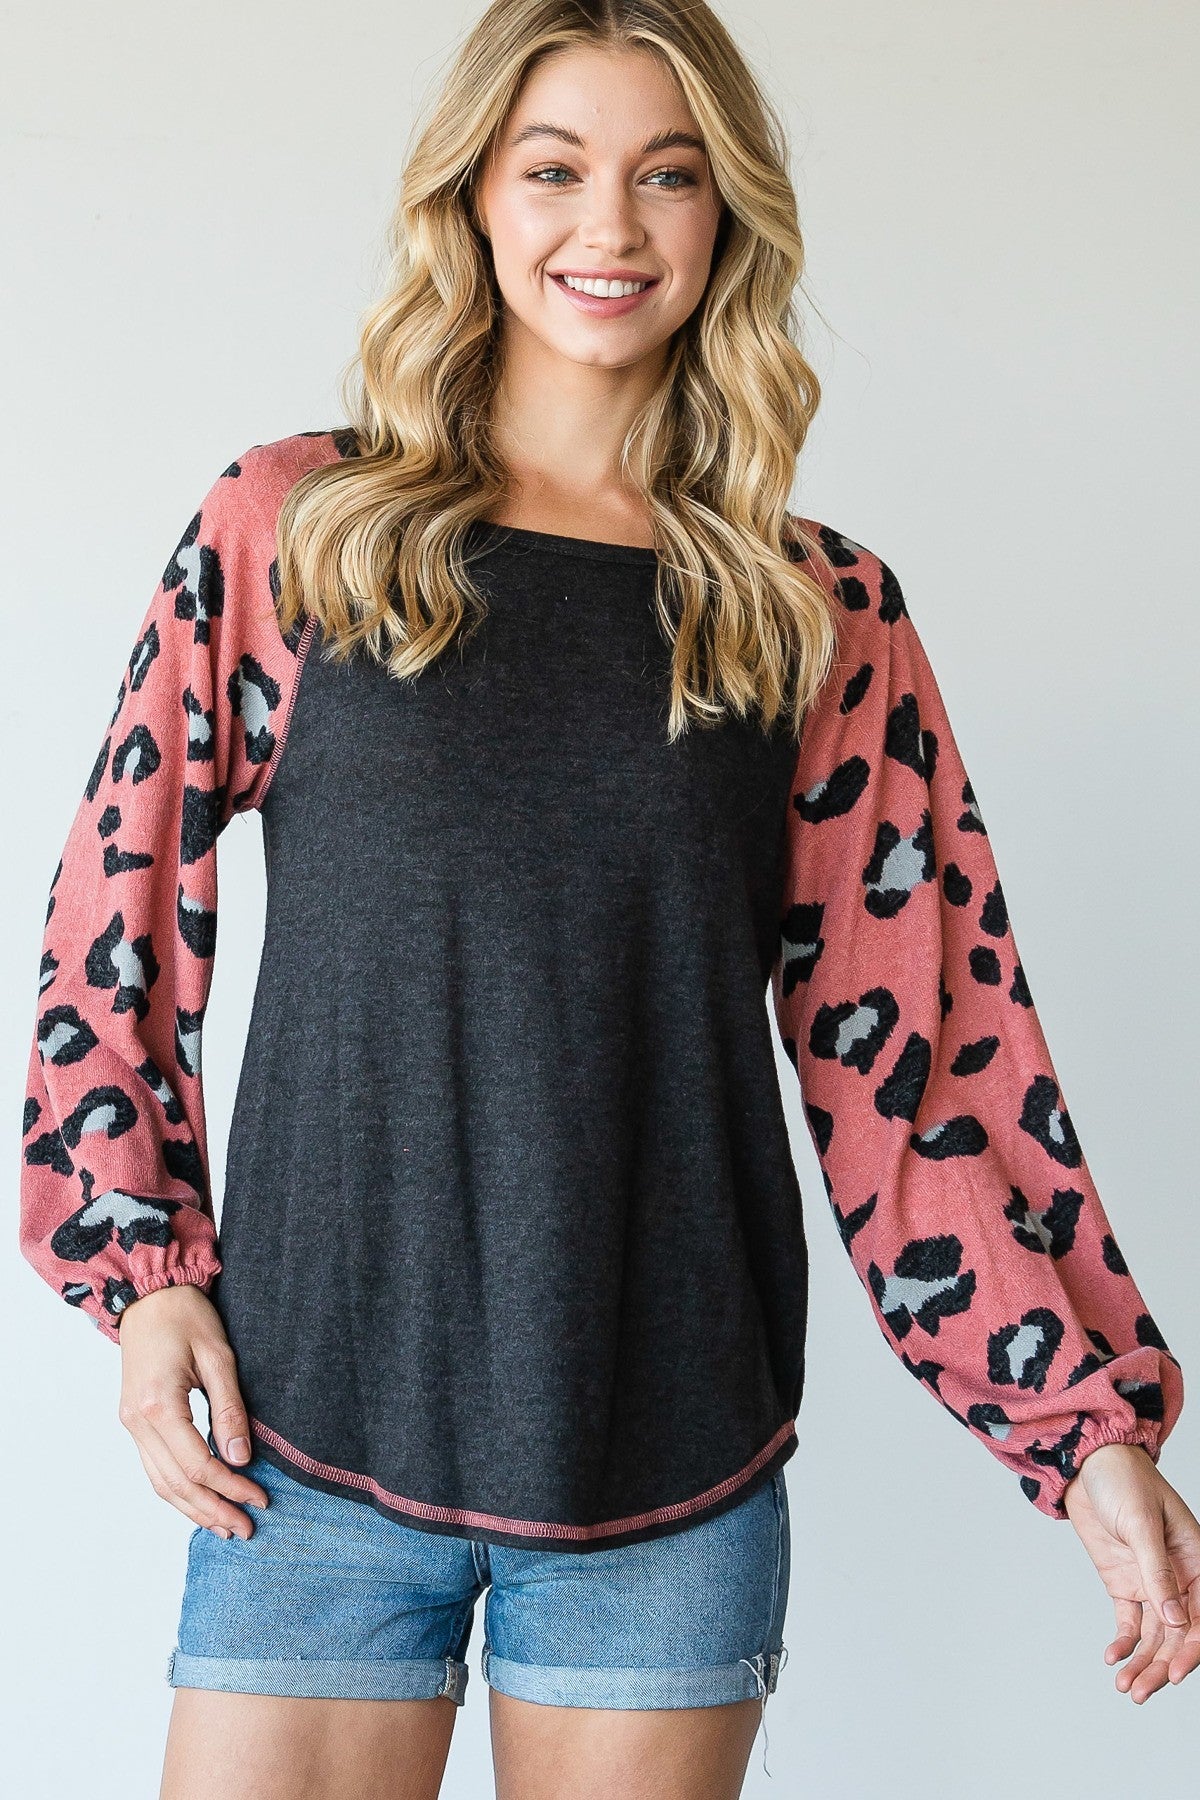 Round Neckline And Animal Print Color Block Top Shirts & Tops jehouze 